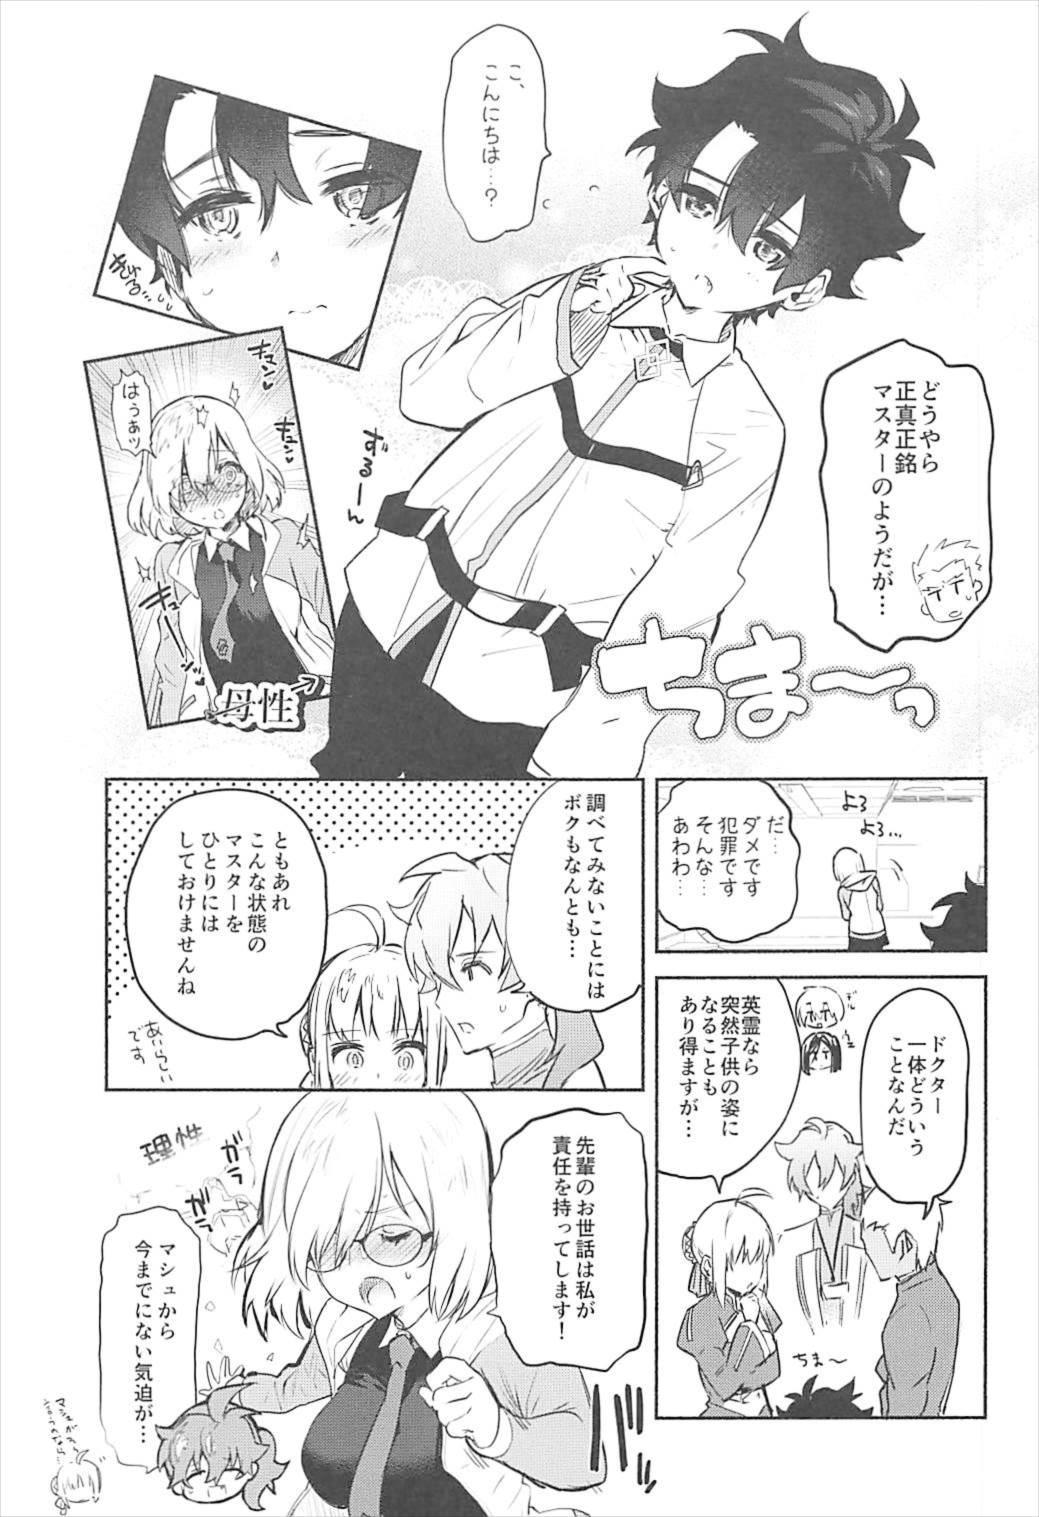 Buttfucking Mash to Issho - Fate grand order Gorda - Page 4